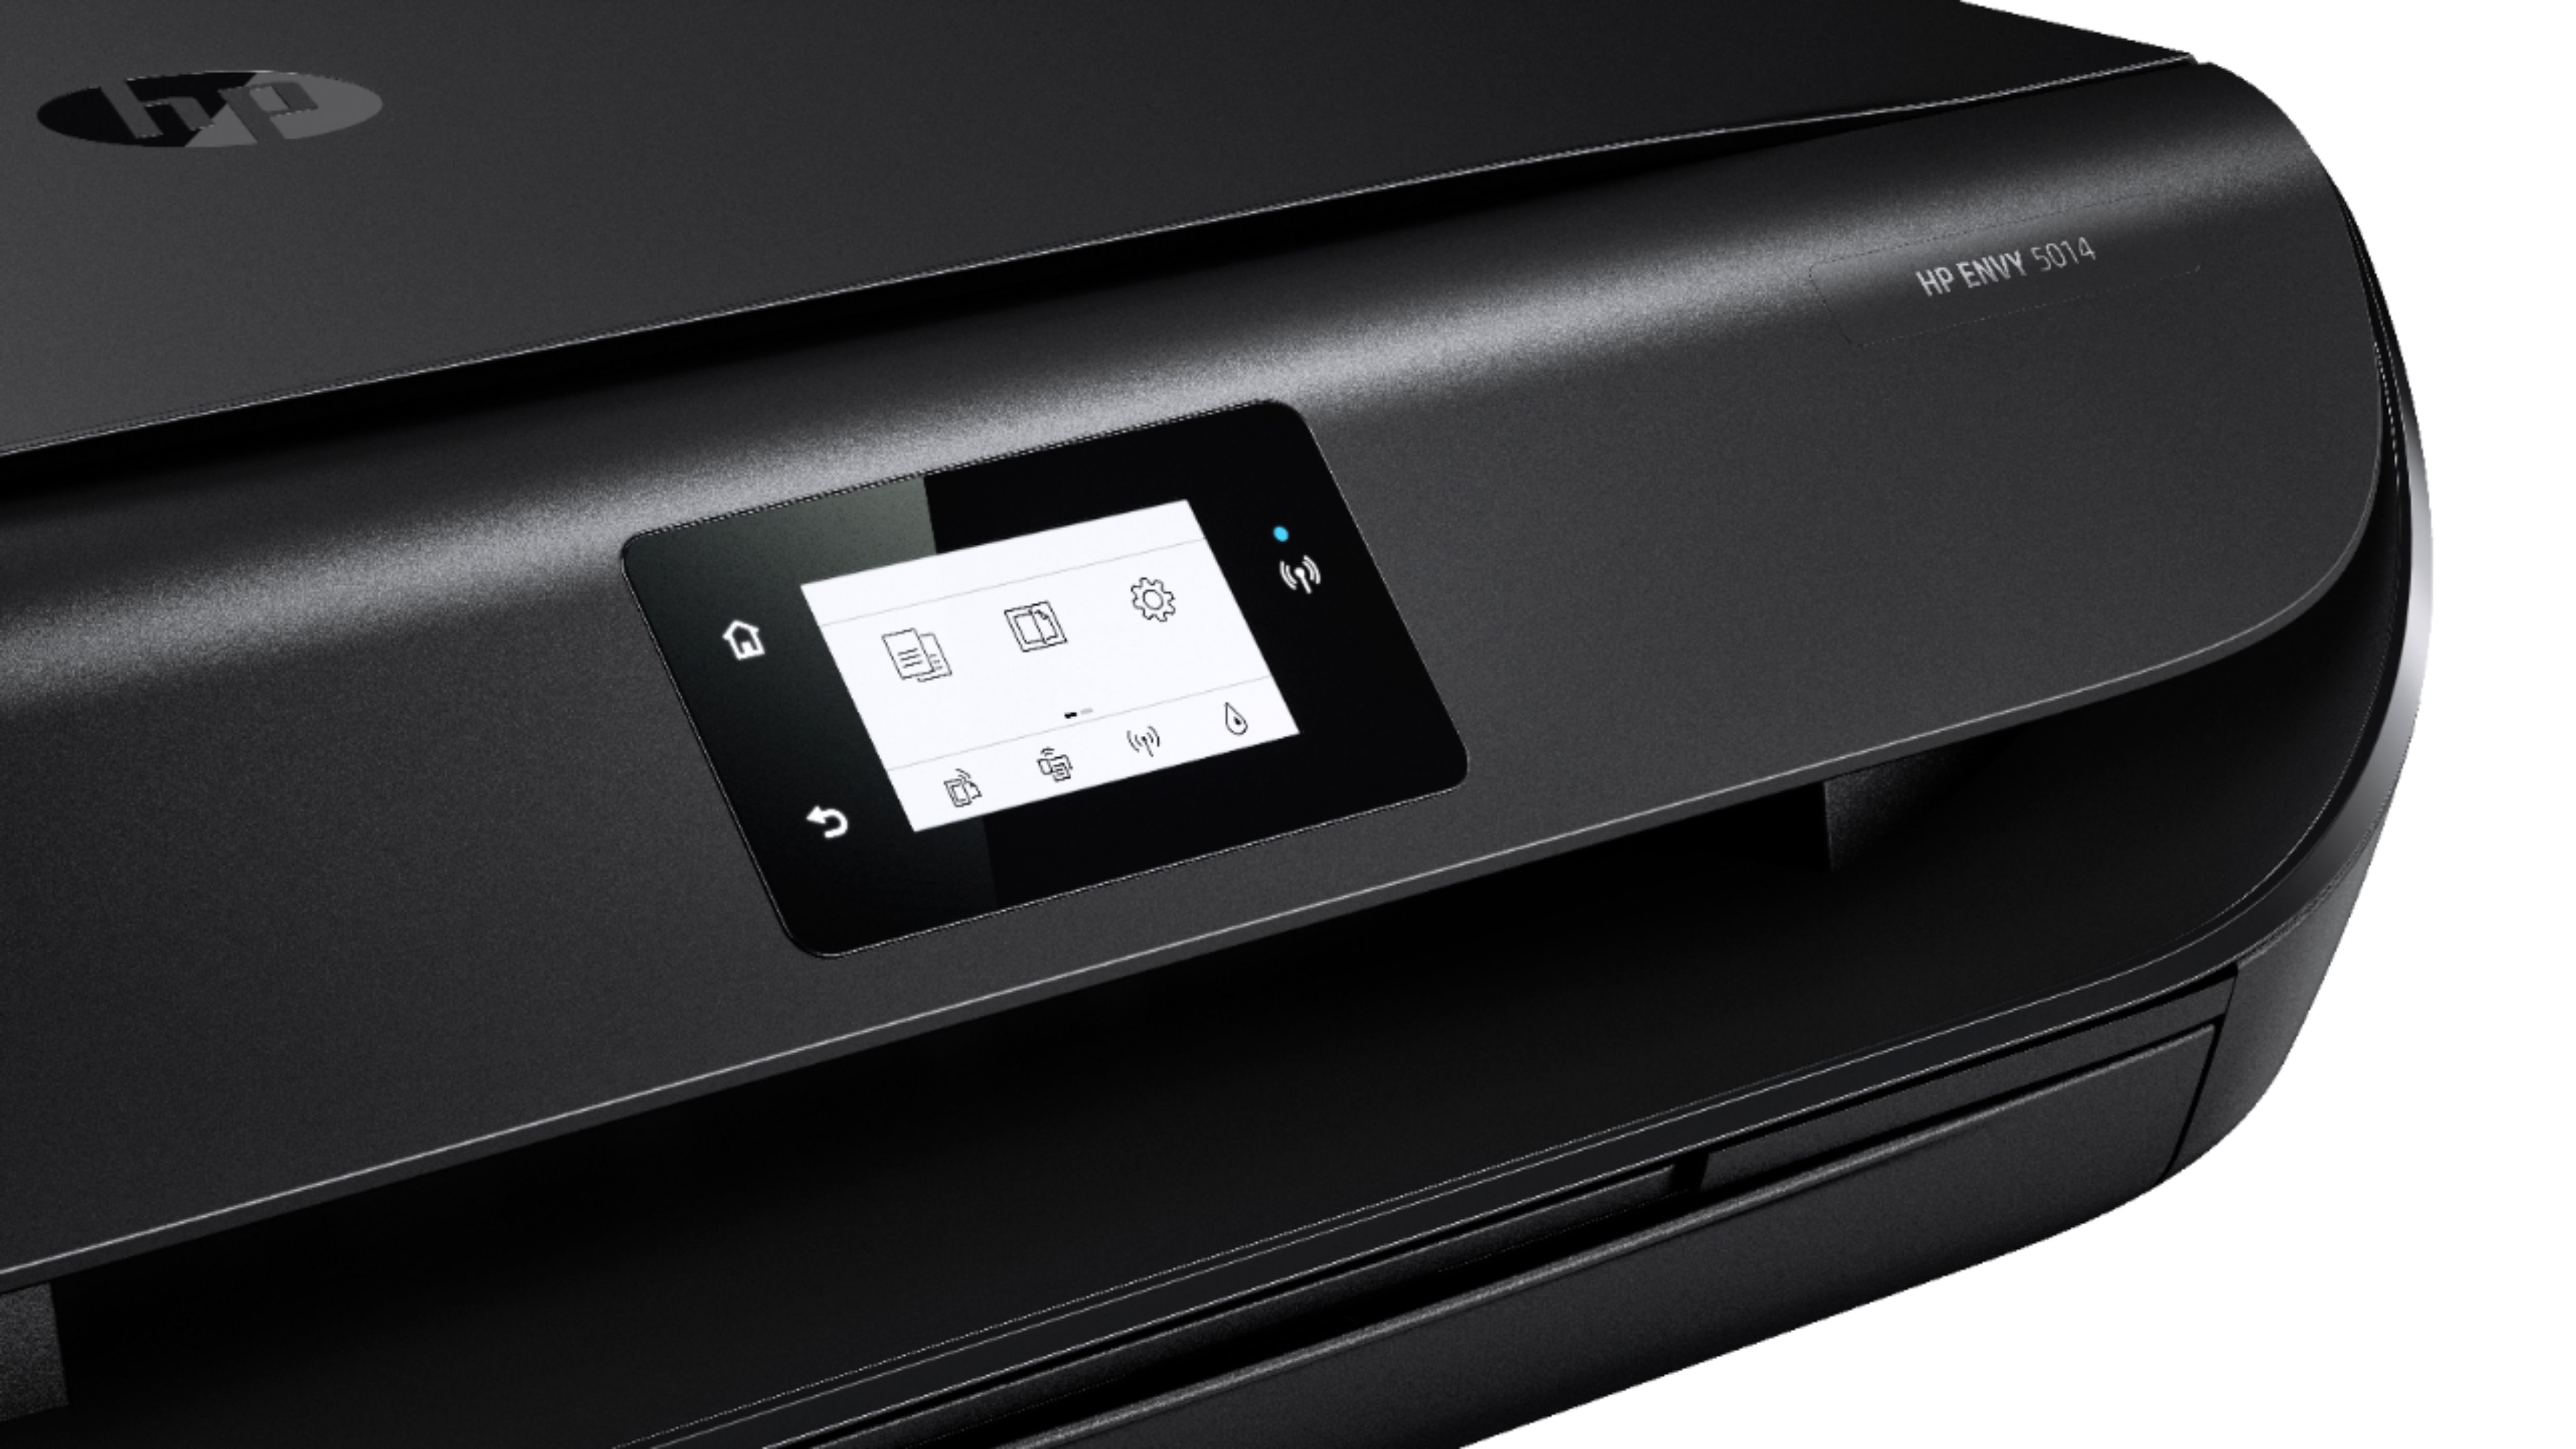 HP Envy 5014 Wireless AllInOne Printer with 10 of Instant Ink